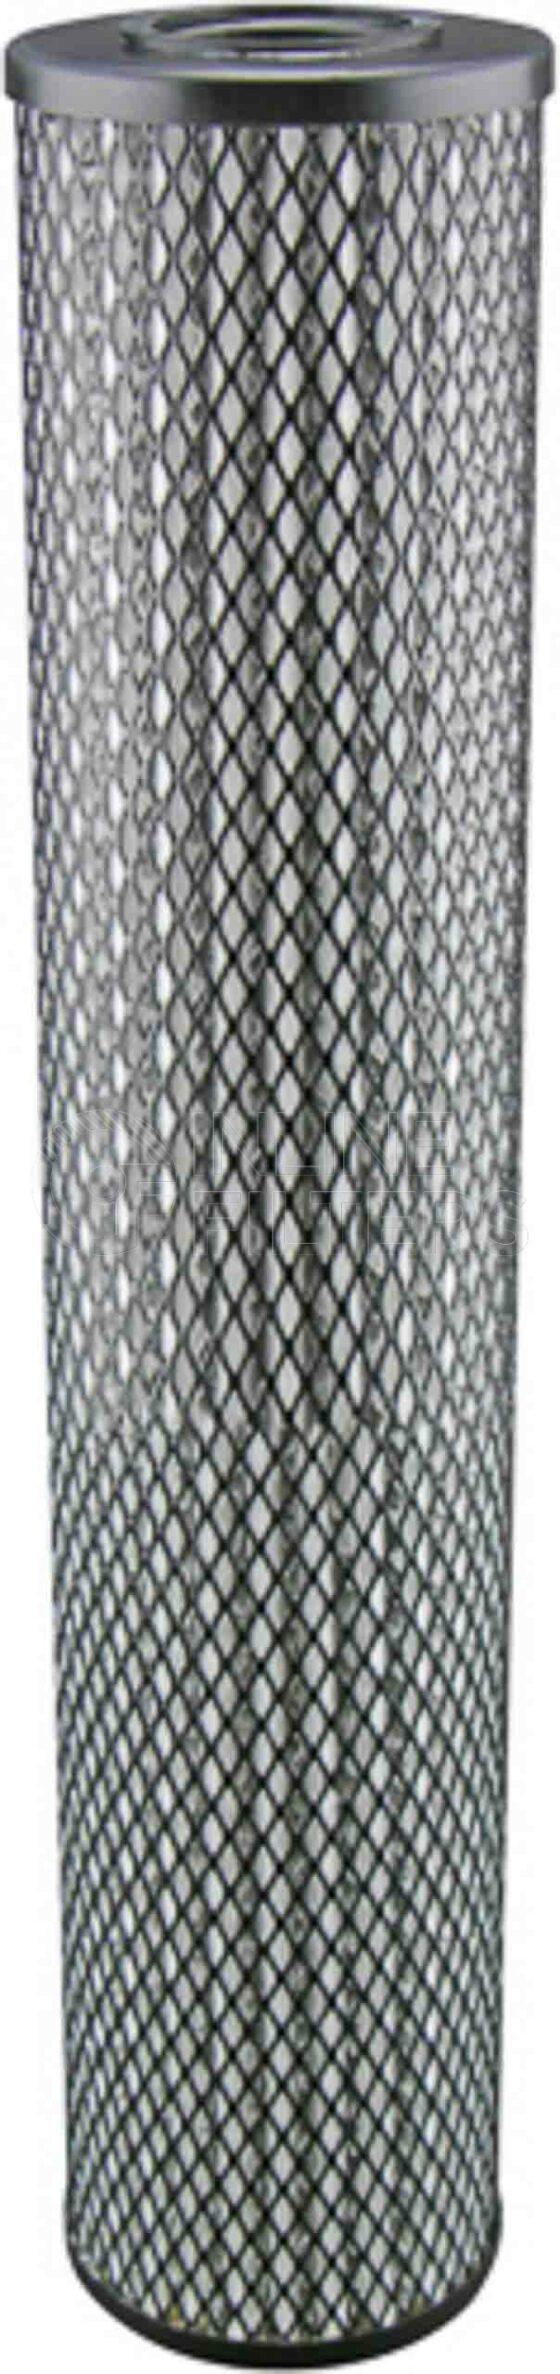 Baldwin PF1589. Fuel Filter Product – Brand Specific Baldwin – Cartridge Product Cartridge fuel filter element Baldwin – Diesel Fuel Filter Elements – PF1589 OBSOLETE OBSOLETE. Availability Limited to Dealer Stock. Product Type Fuel Element Inside Diameter (mm) 43.7 Length (inch) 17 15/16 Inside Diameter (inch) 21/32 (&) Length (mm) 455.6 Replaces Vokes D6357734 Application Engine diesel […]